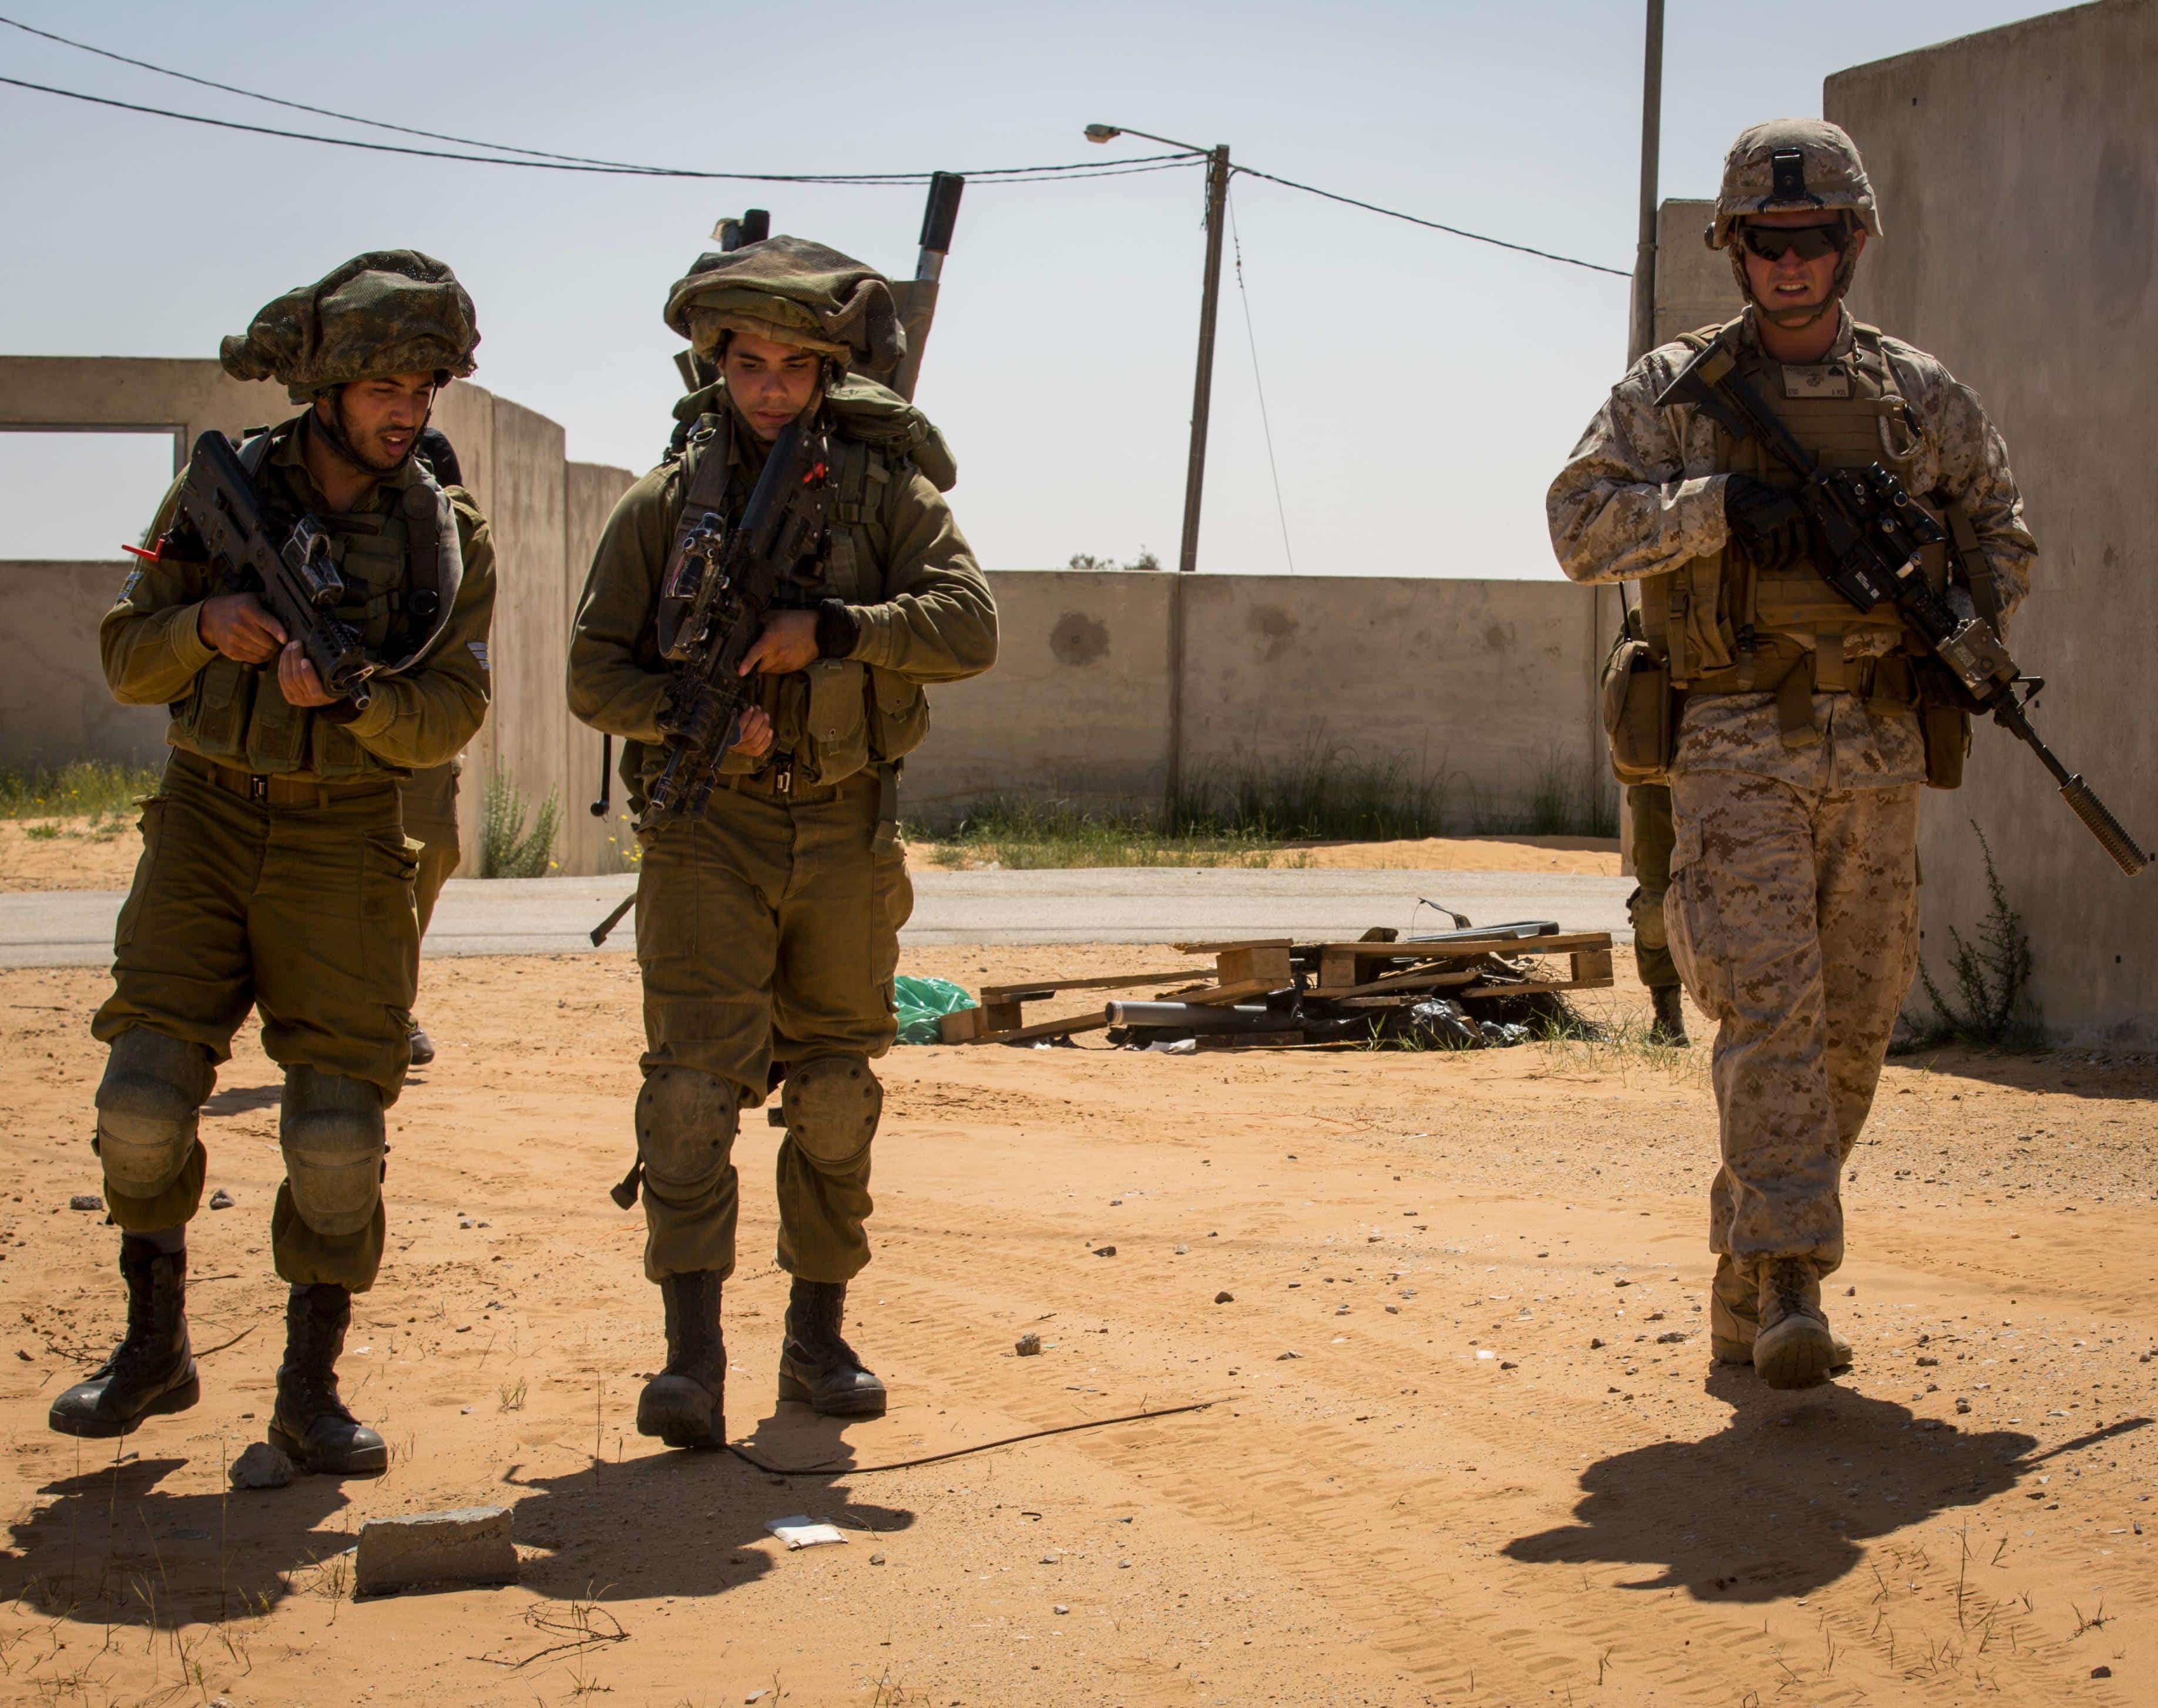 U.S. Marine Cpl. Scott Groves, a rifleman with Marine Rotational Force Europe 17.1 patrols with Israeli soldiers in an urban environment training site in Israel, March 28, 2017. The U.S. and Israel enjoy a strong enduring partnership formed by military-to-military training evolutions. (U.S. Marine Corps photo by Lance Cpl. Sarah N. Petrock)